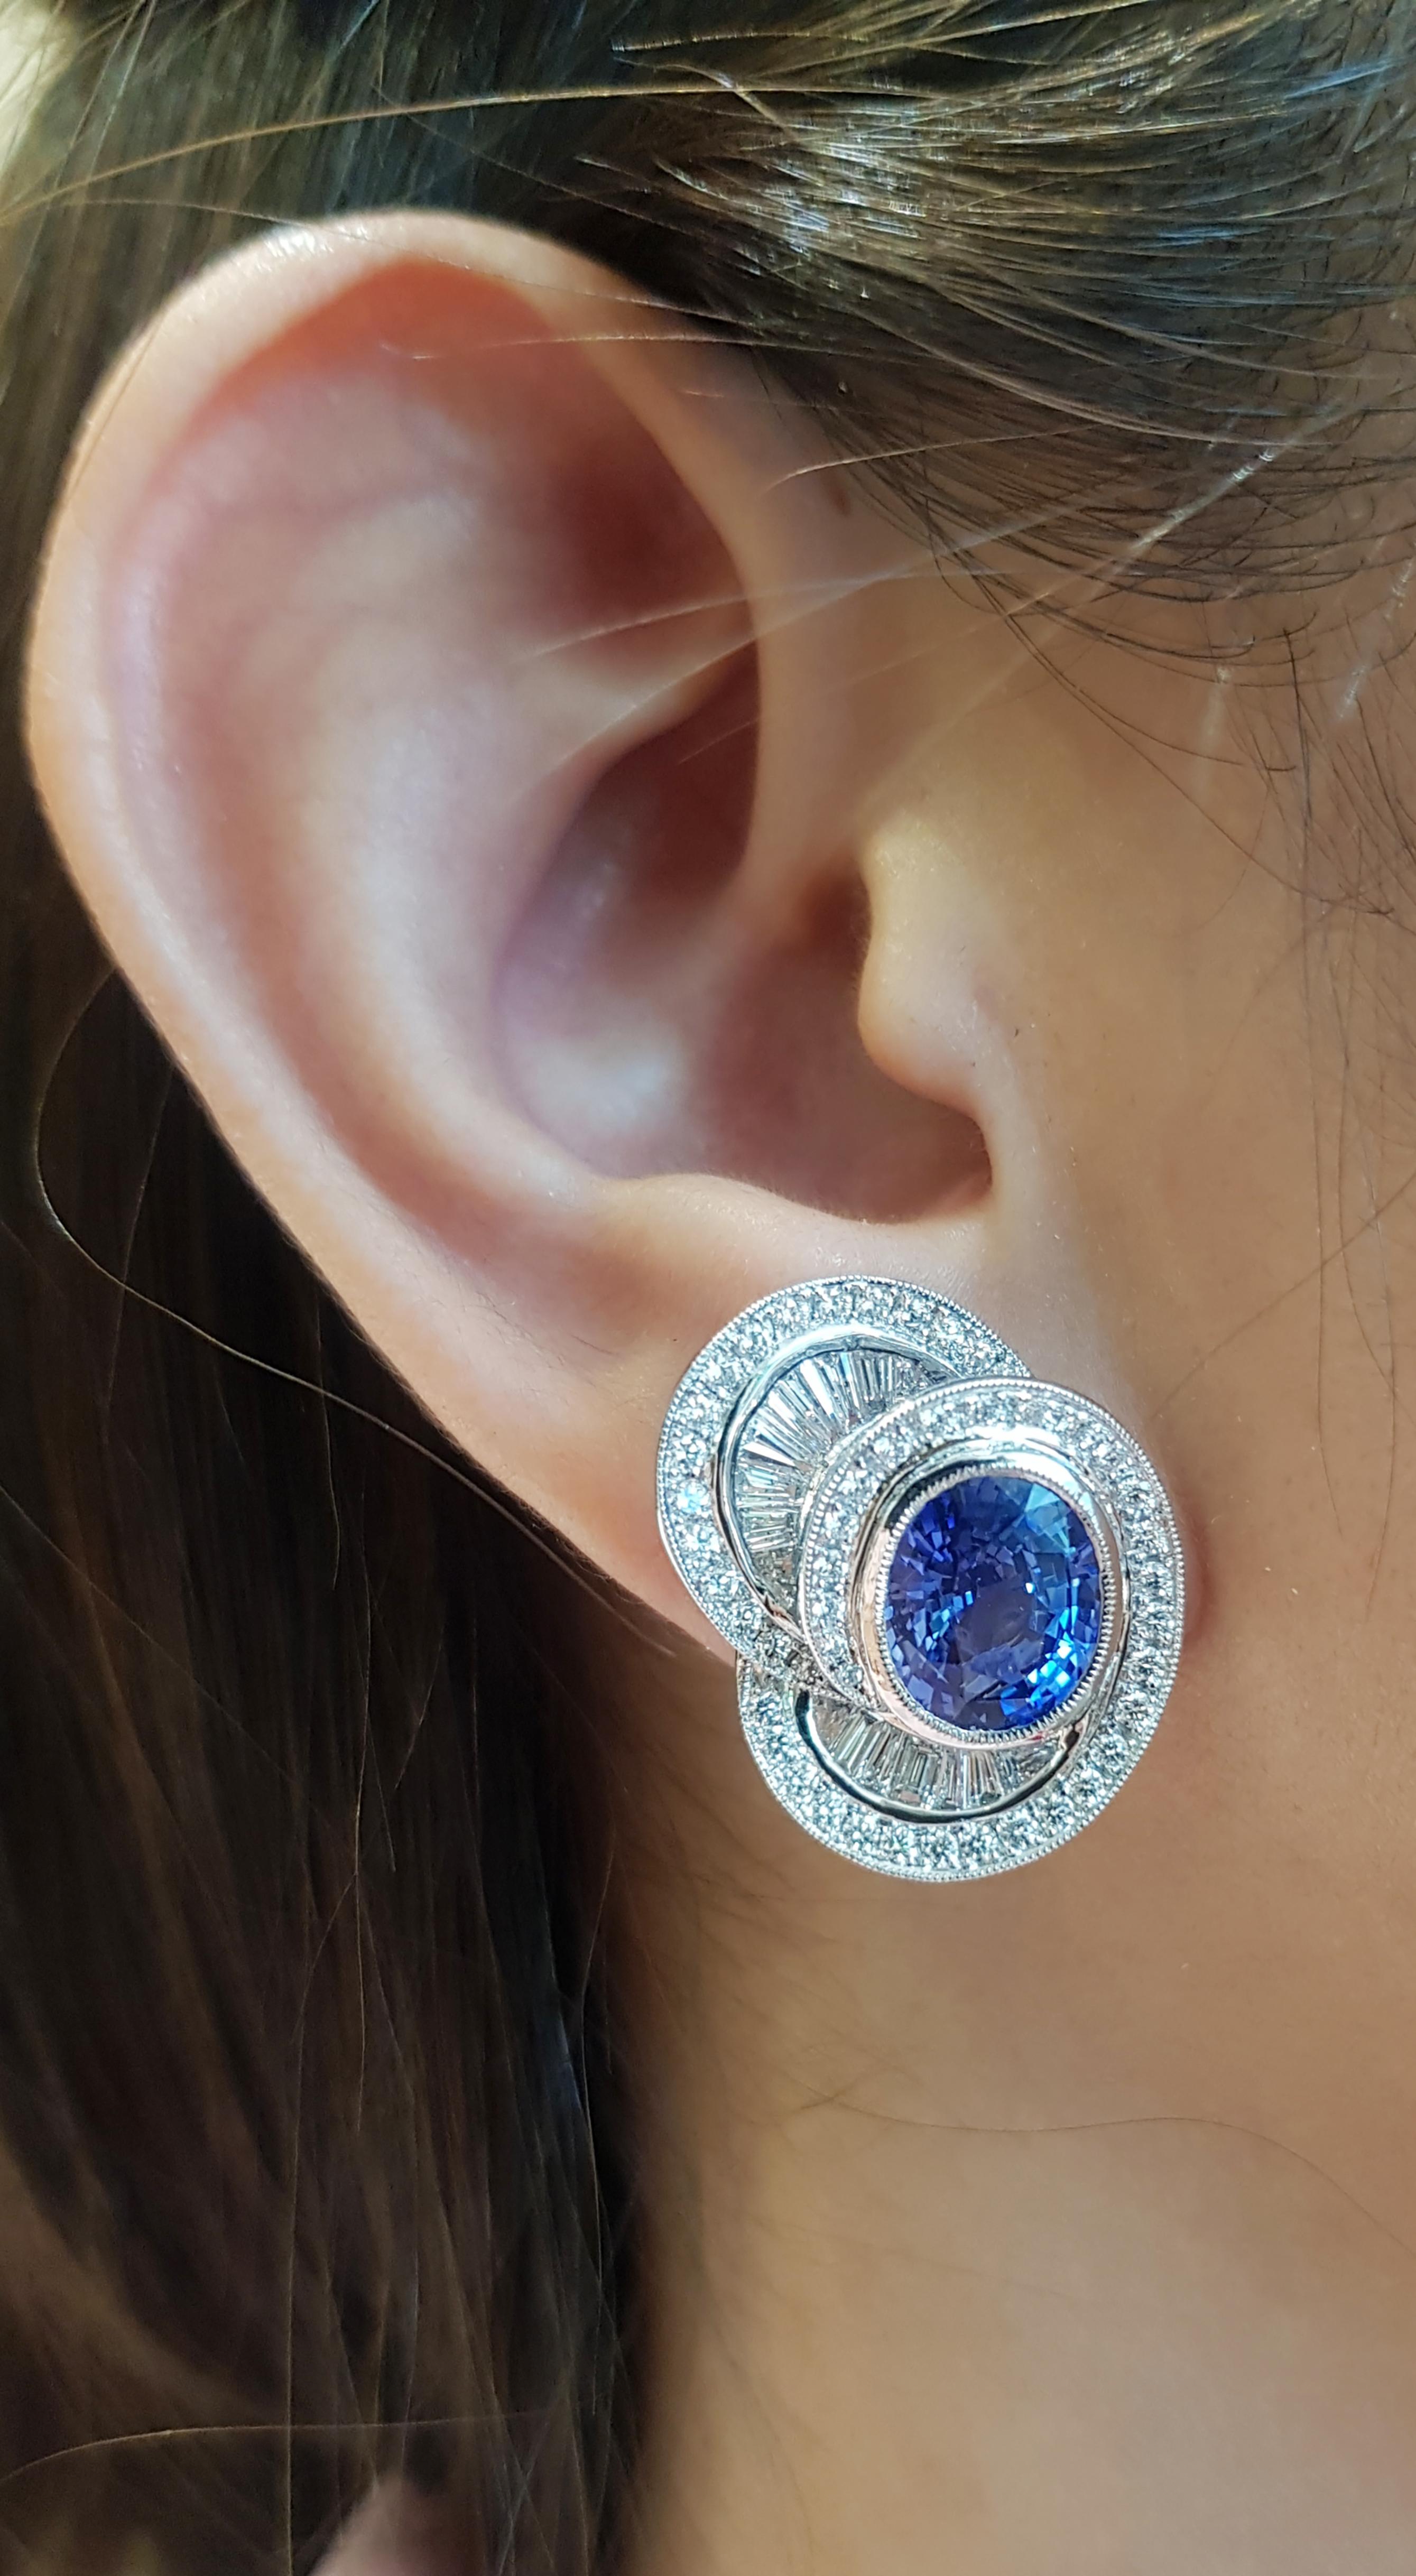 Blue Sapphire 9.22 carats with Diamond 2.09 carats Earrings set in Platinum 950 Settings

Width:  1.9 cm 
Length: 2.4 cm
Total Weight: 20.3 grams

